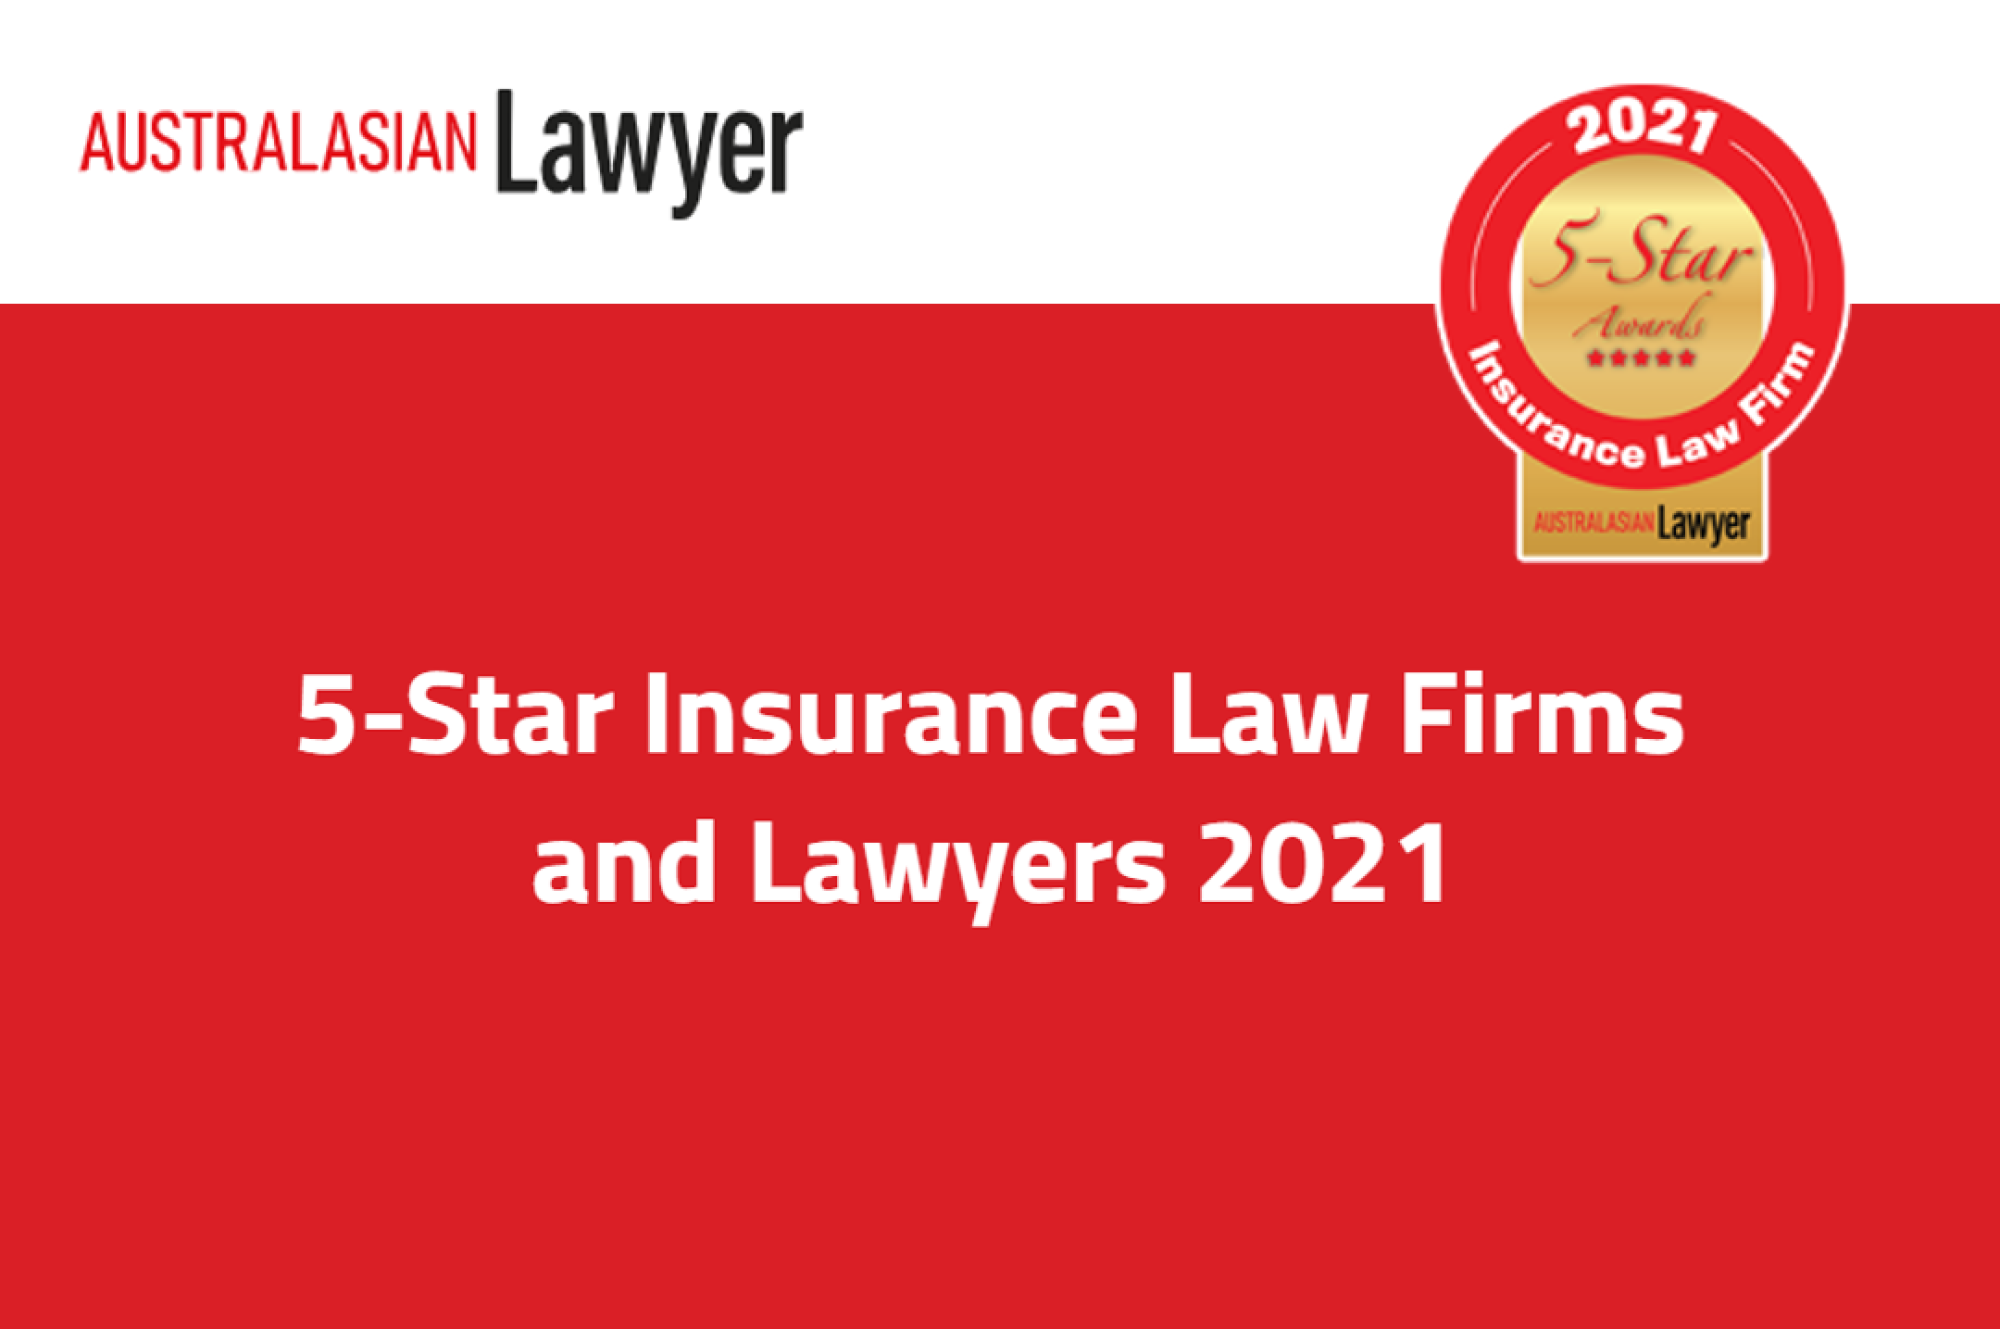 W+K named in inaugural “5-Star Insurance Law Firm” list